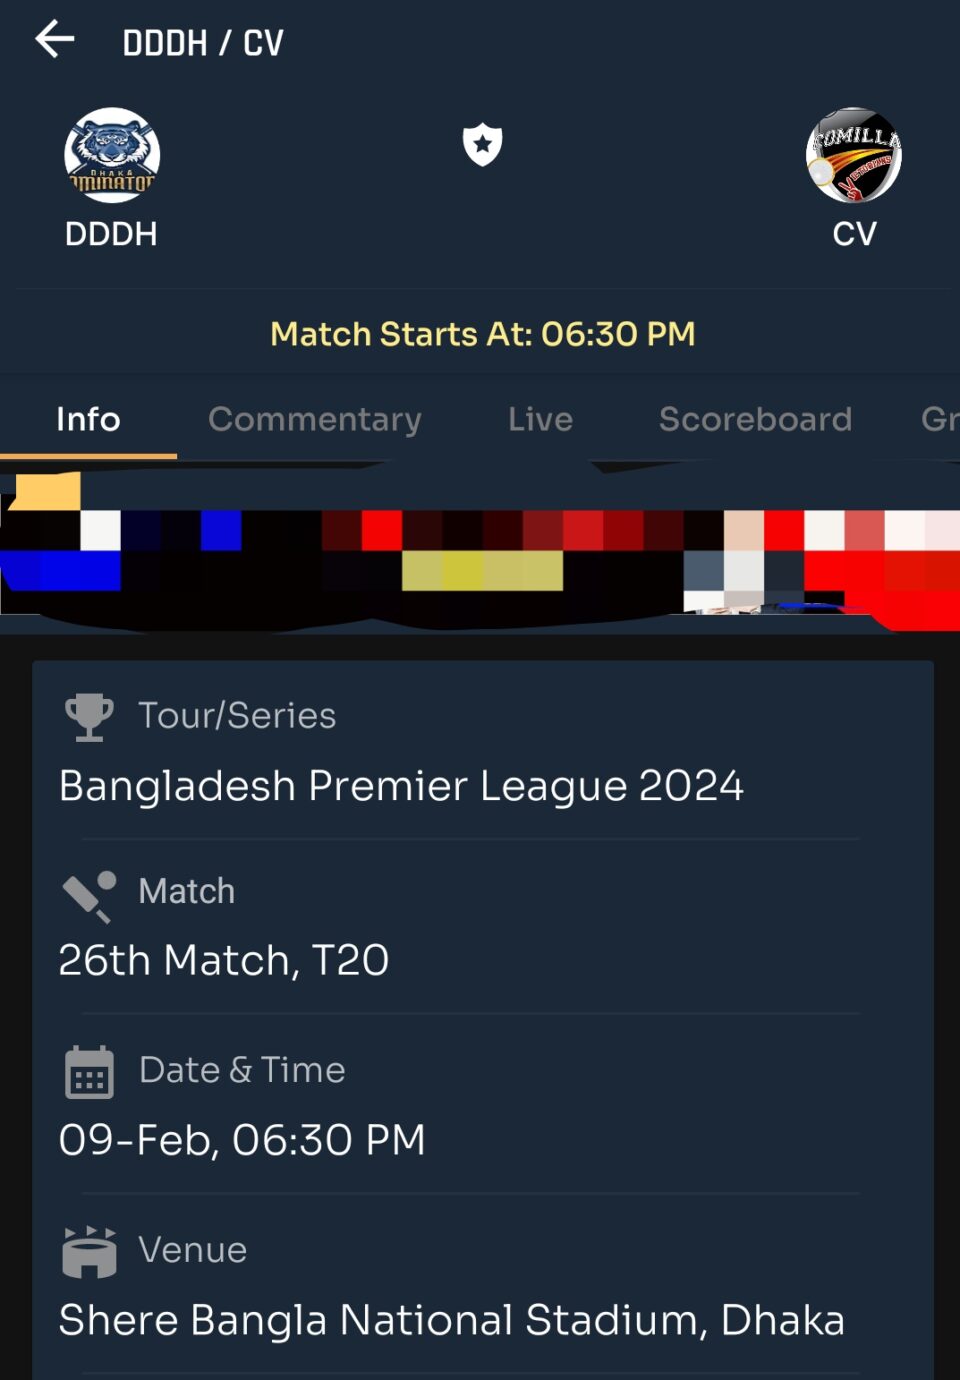 Today BPL Prediction |Match Number 26 |DDDH vs CV| Toss and Match Analysis | Pitch & Weather Report